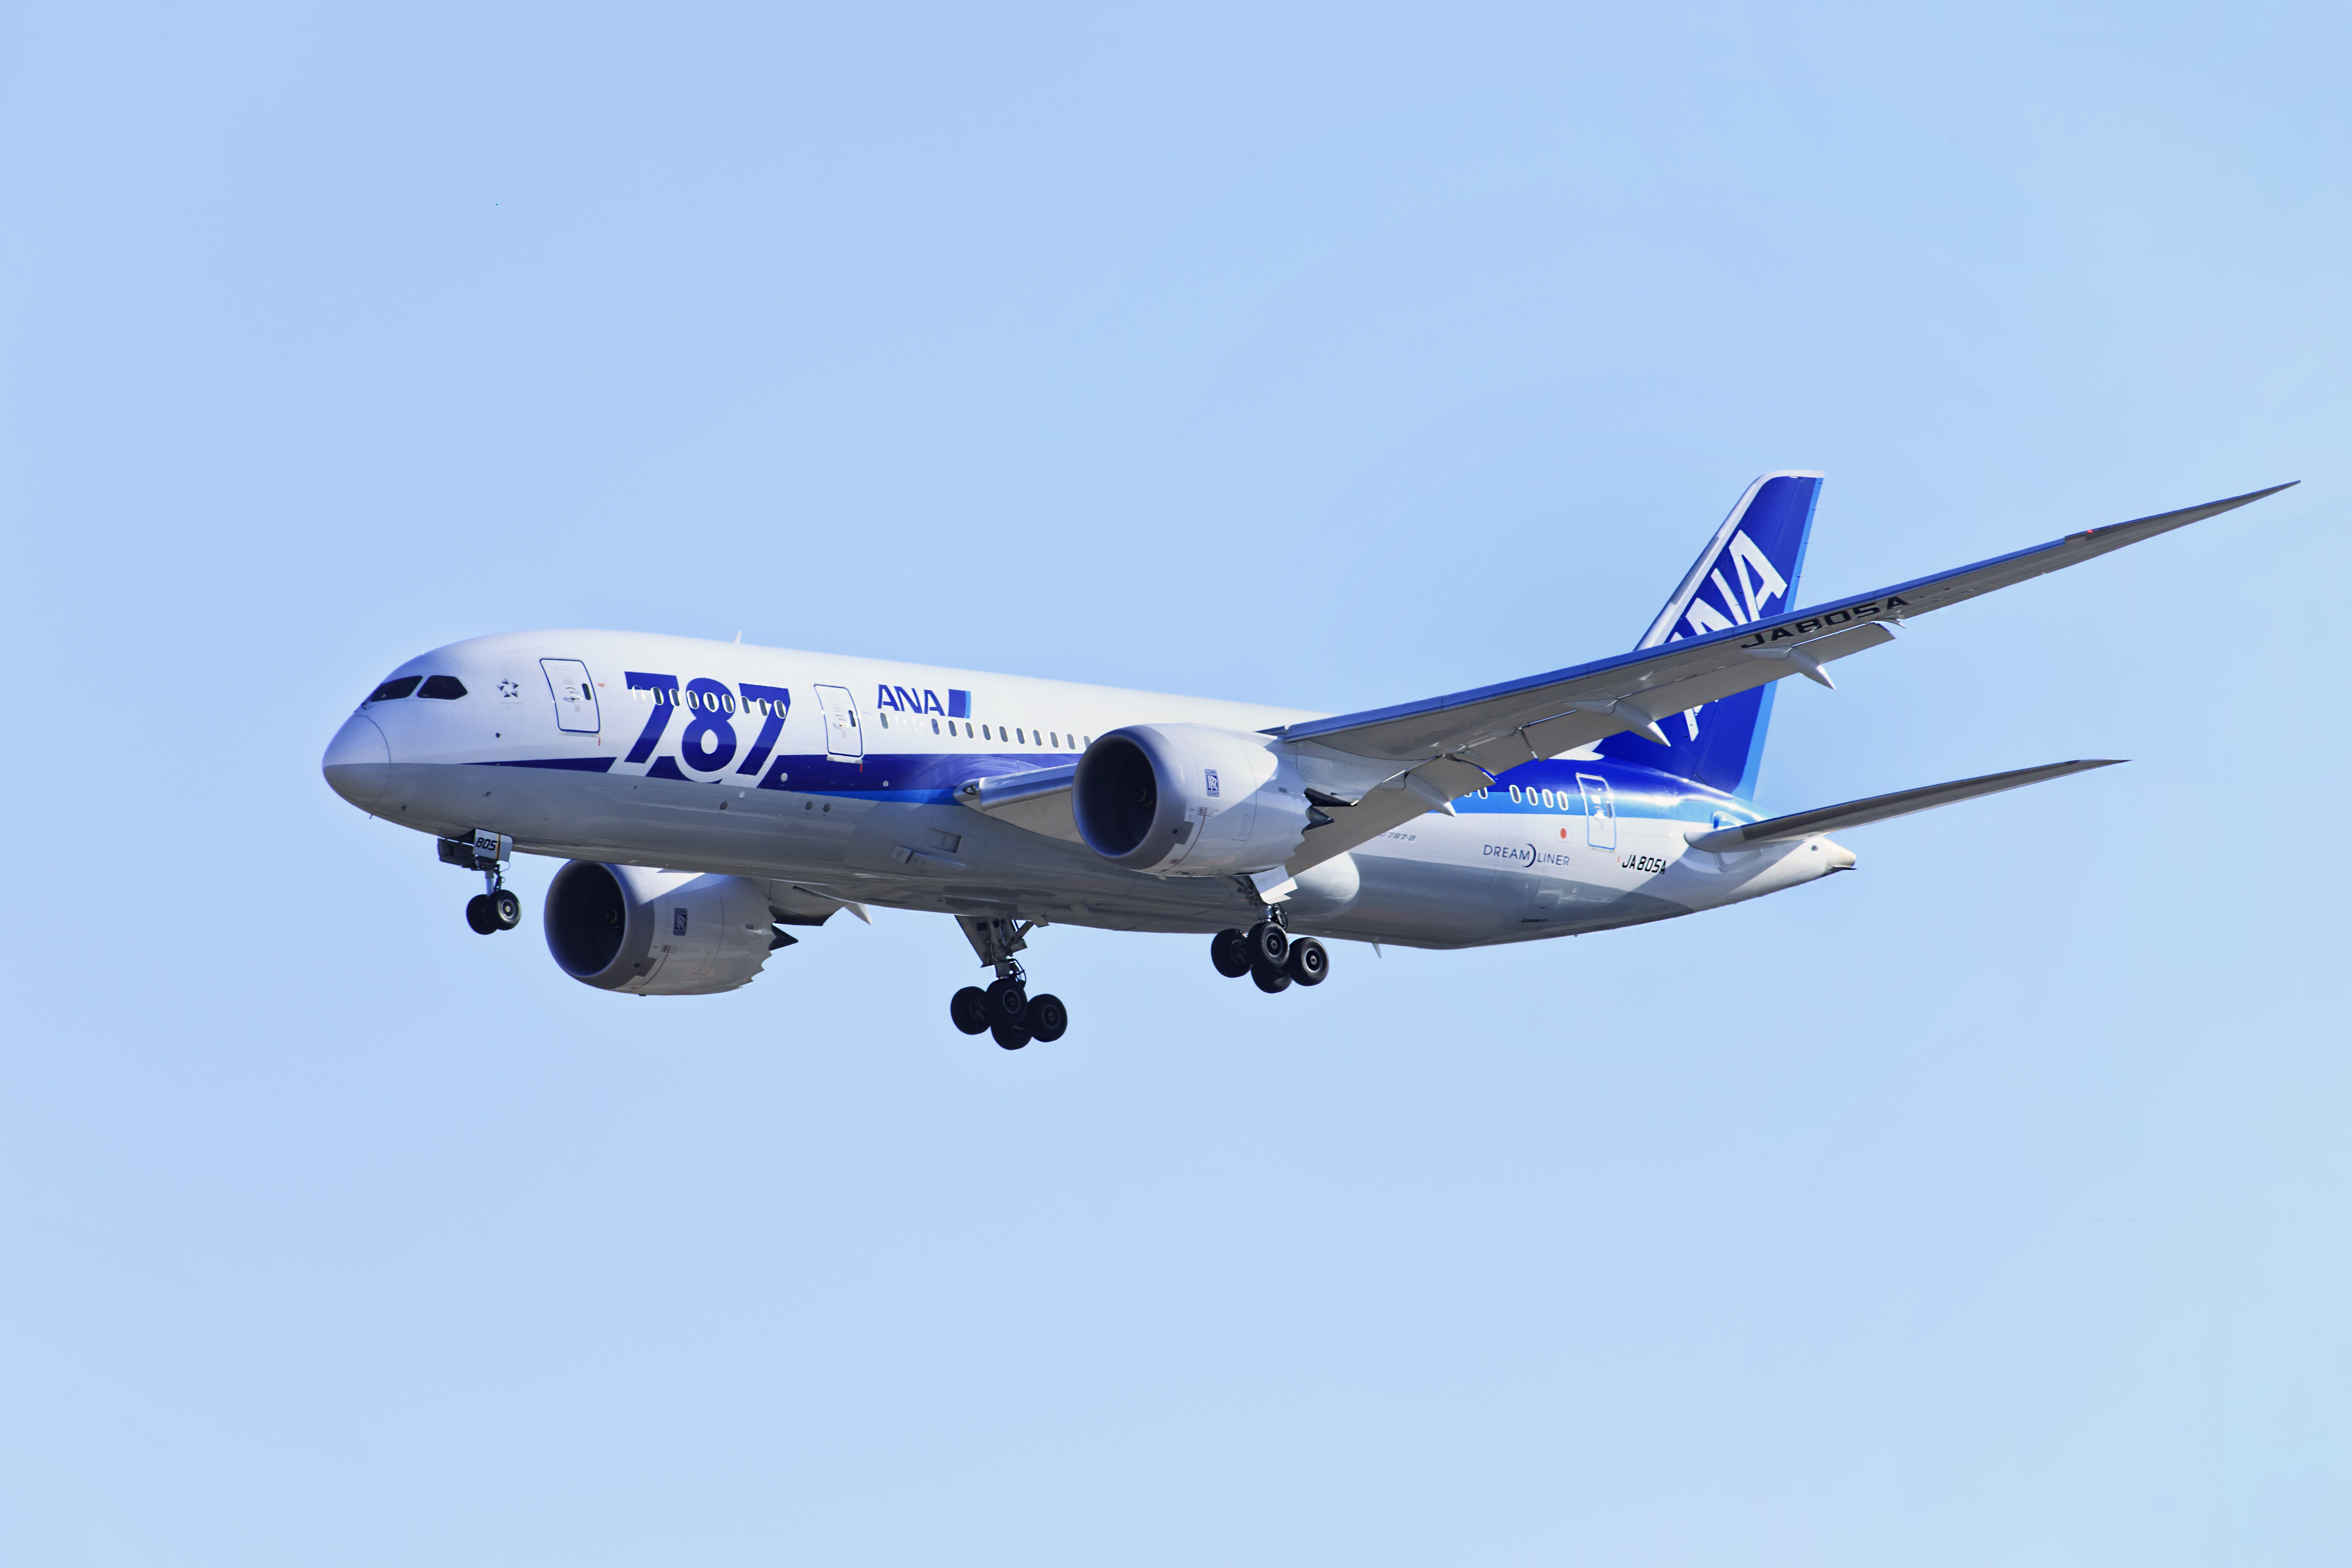 Toray is extending the existing supply agreement for the Boeing 787 Dreamliner.